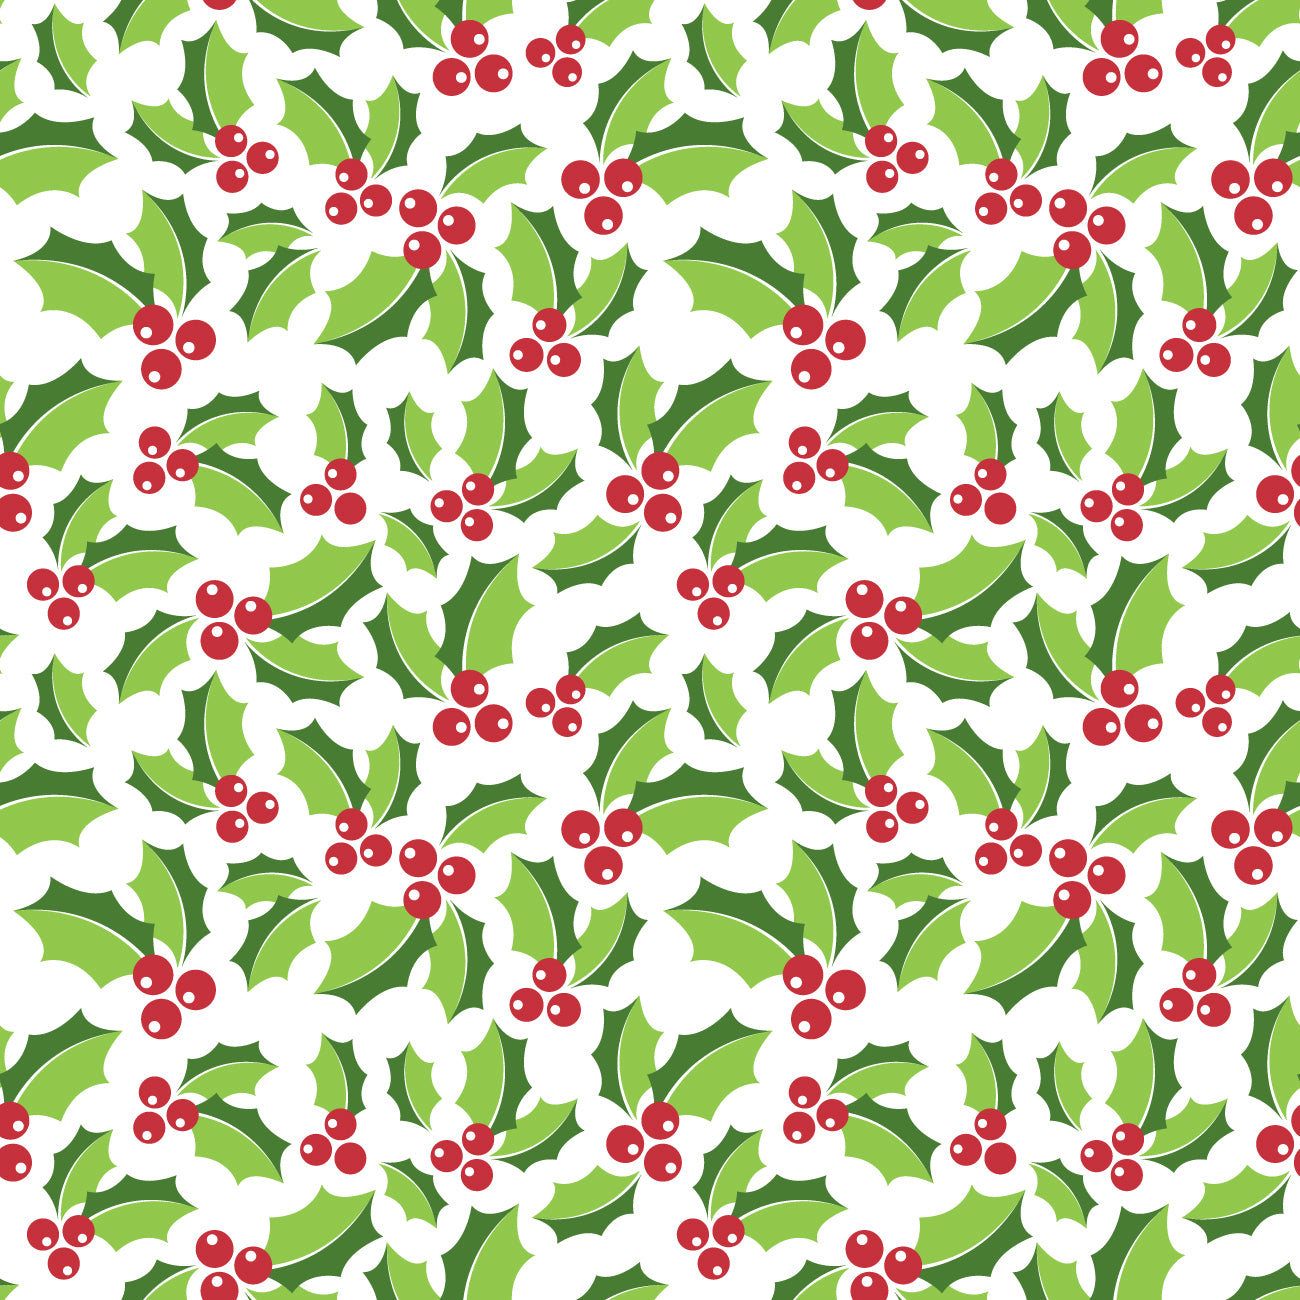 Christmas 12x12 Ivy - Mistletoe Background or Page